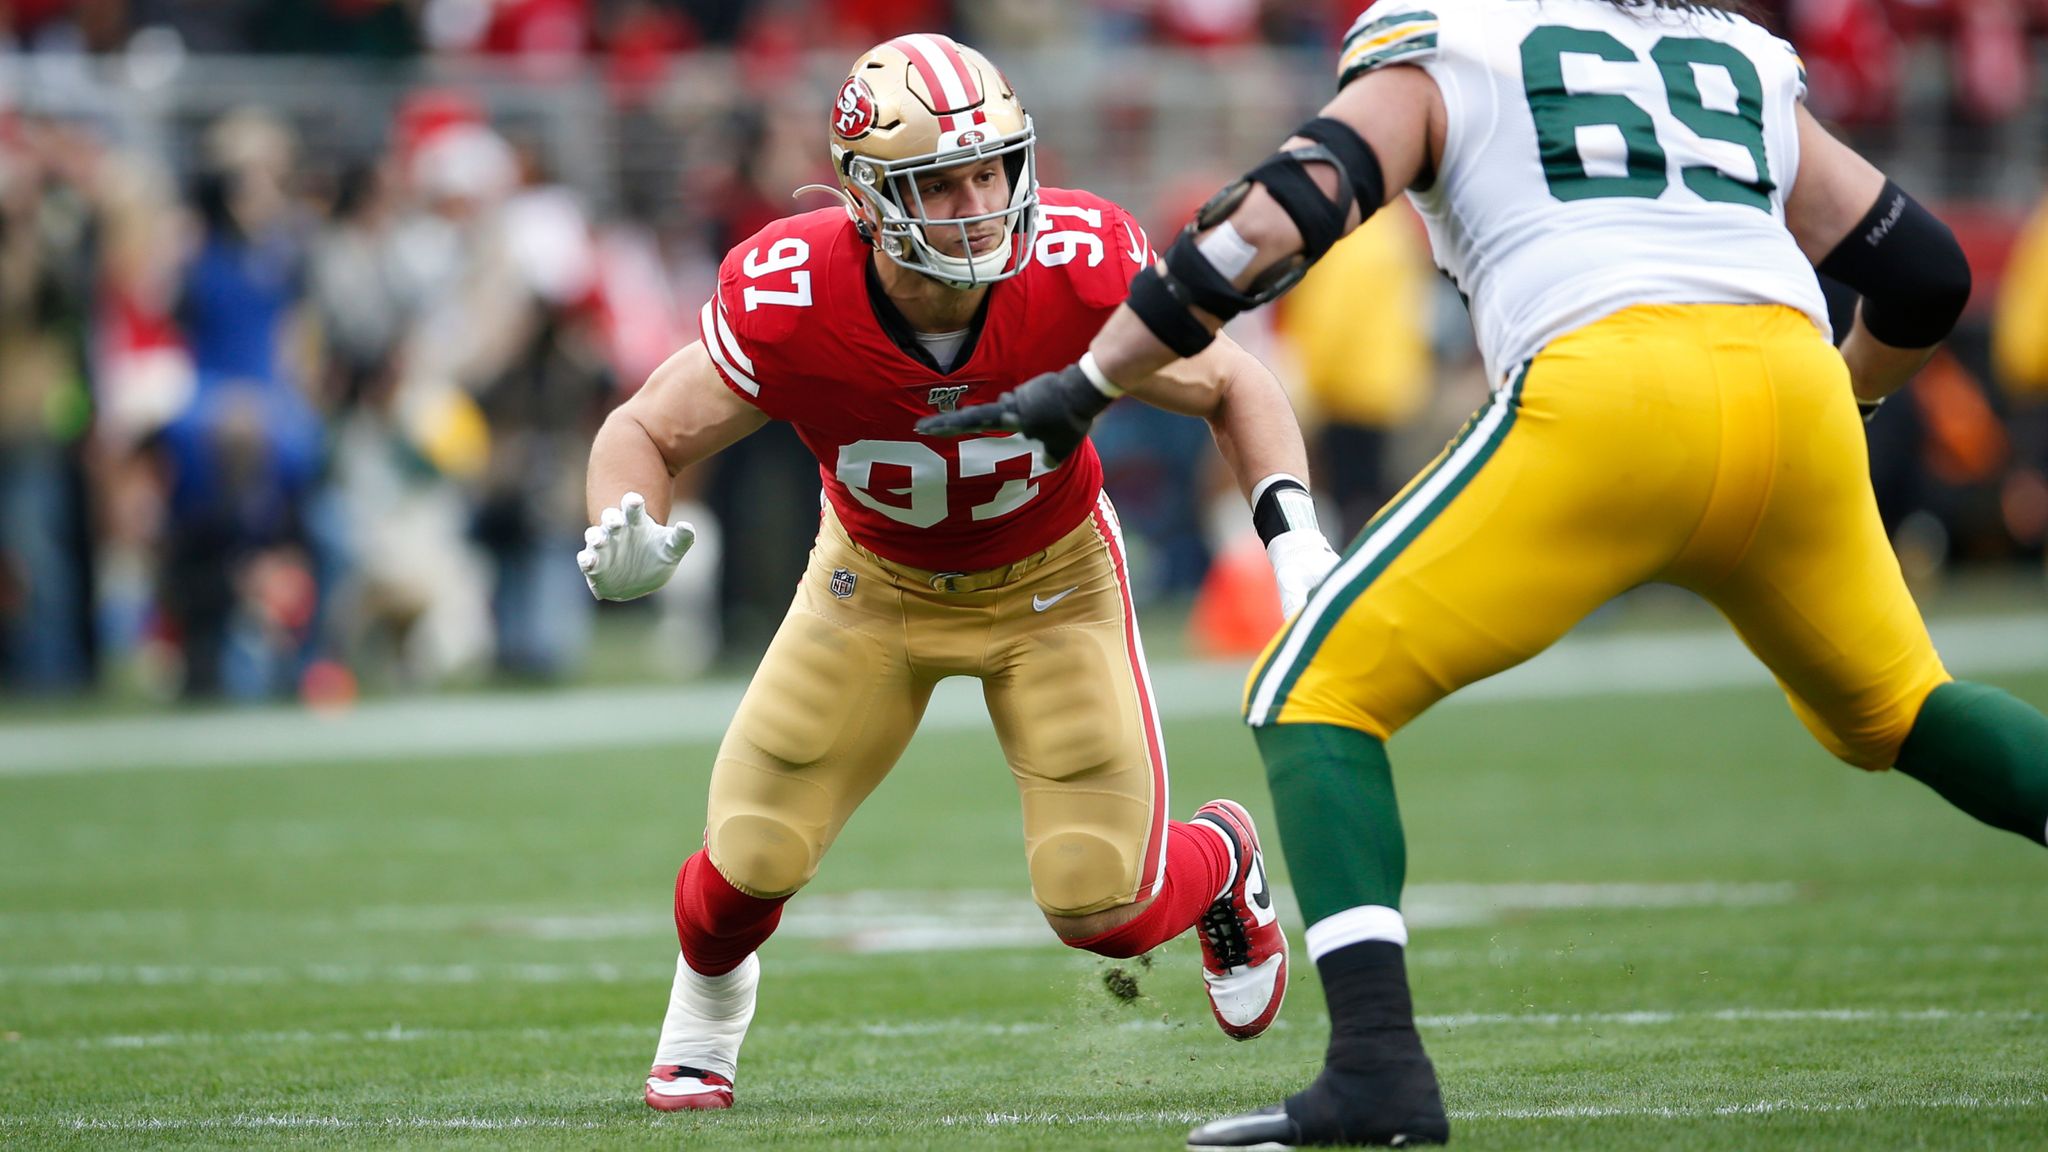 49ers hopeful Bosa will be cleared to play vs. Packers